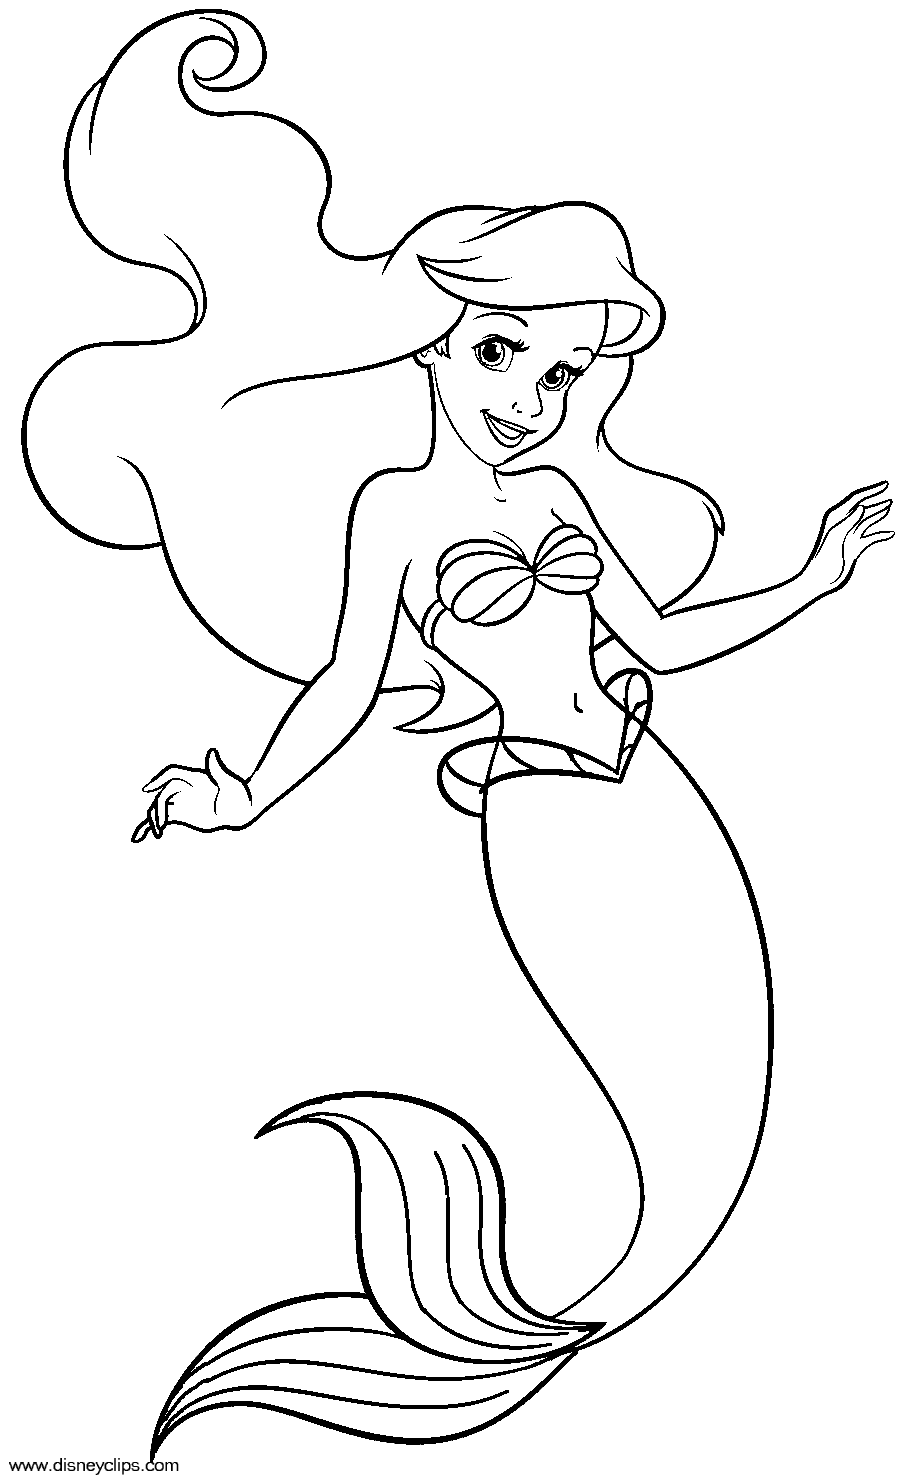 Cartoon Mermaid Coloring Page | Coloring Pages For All Ages